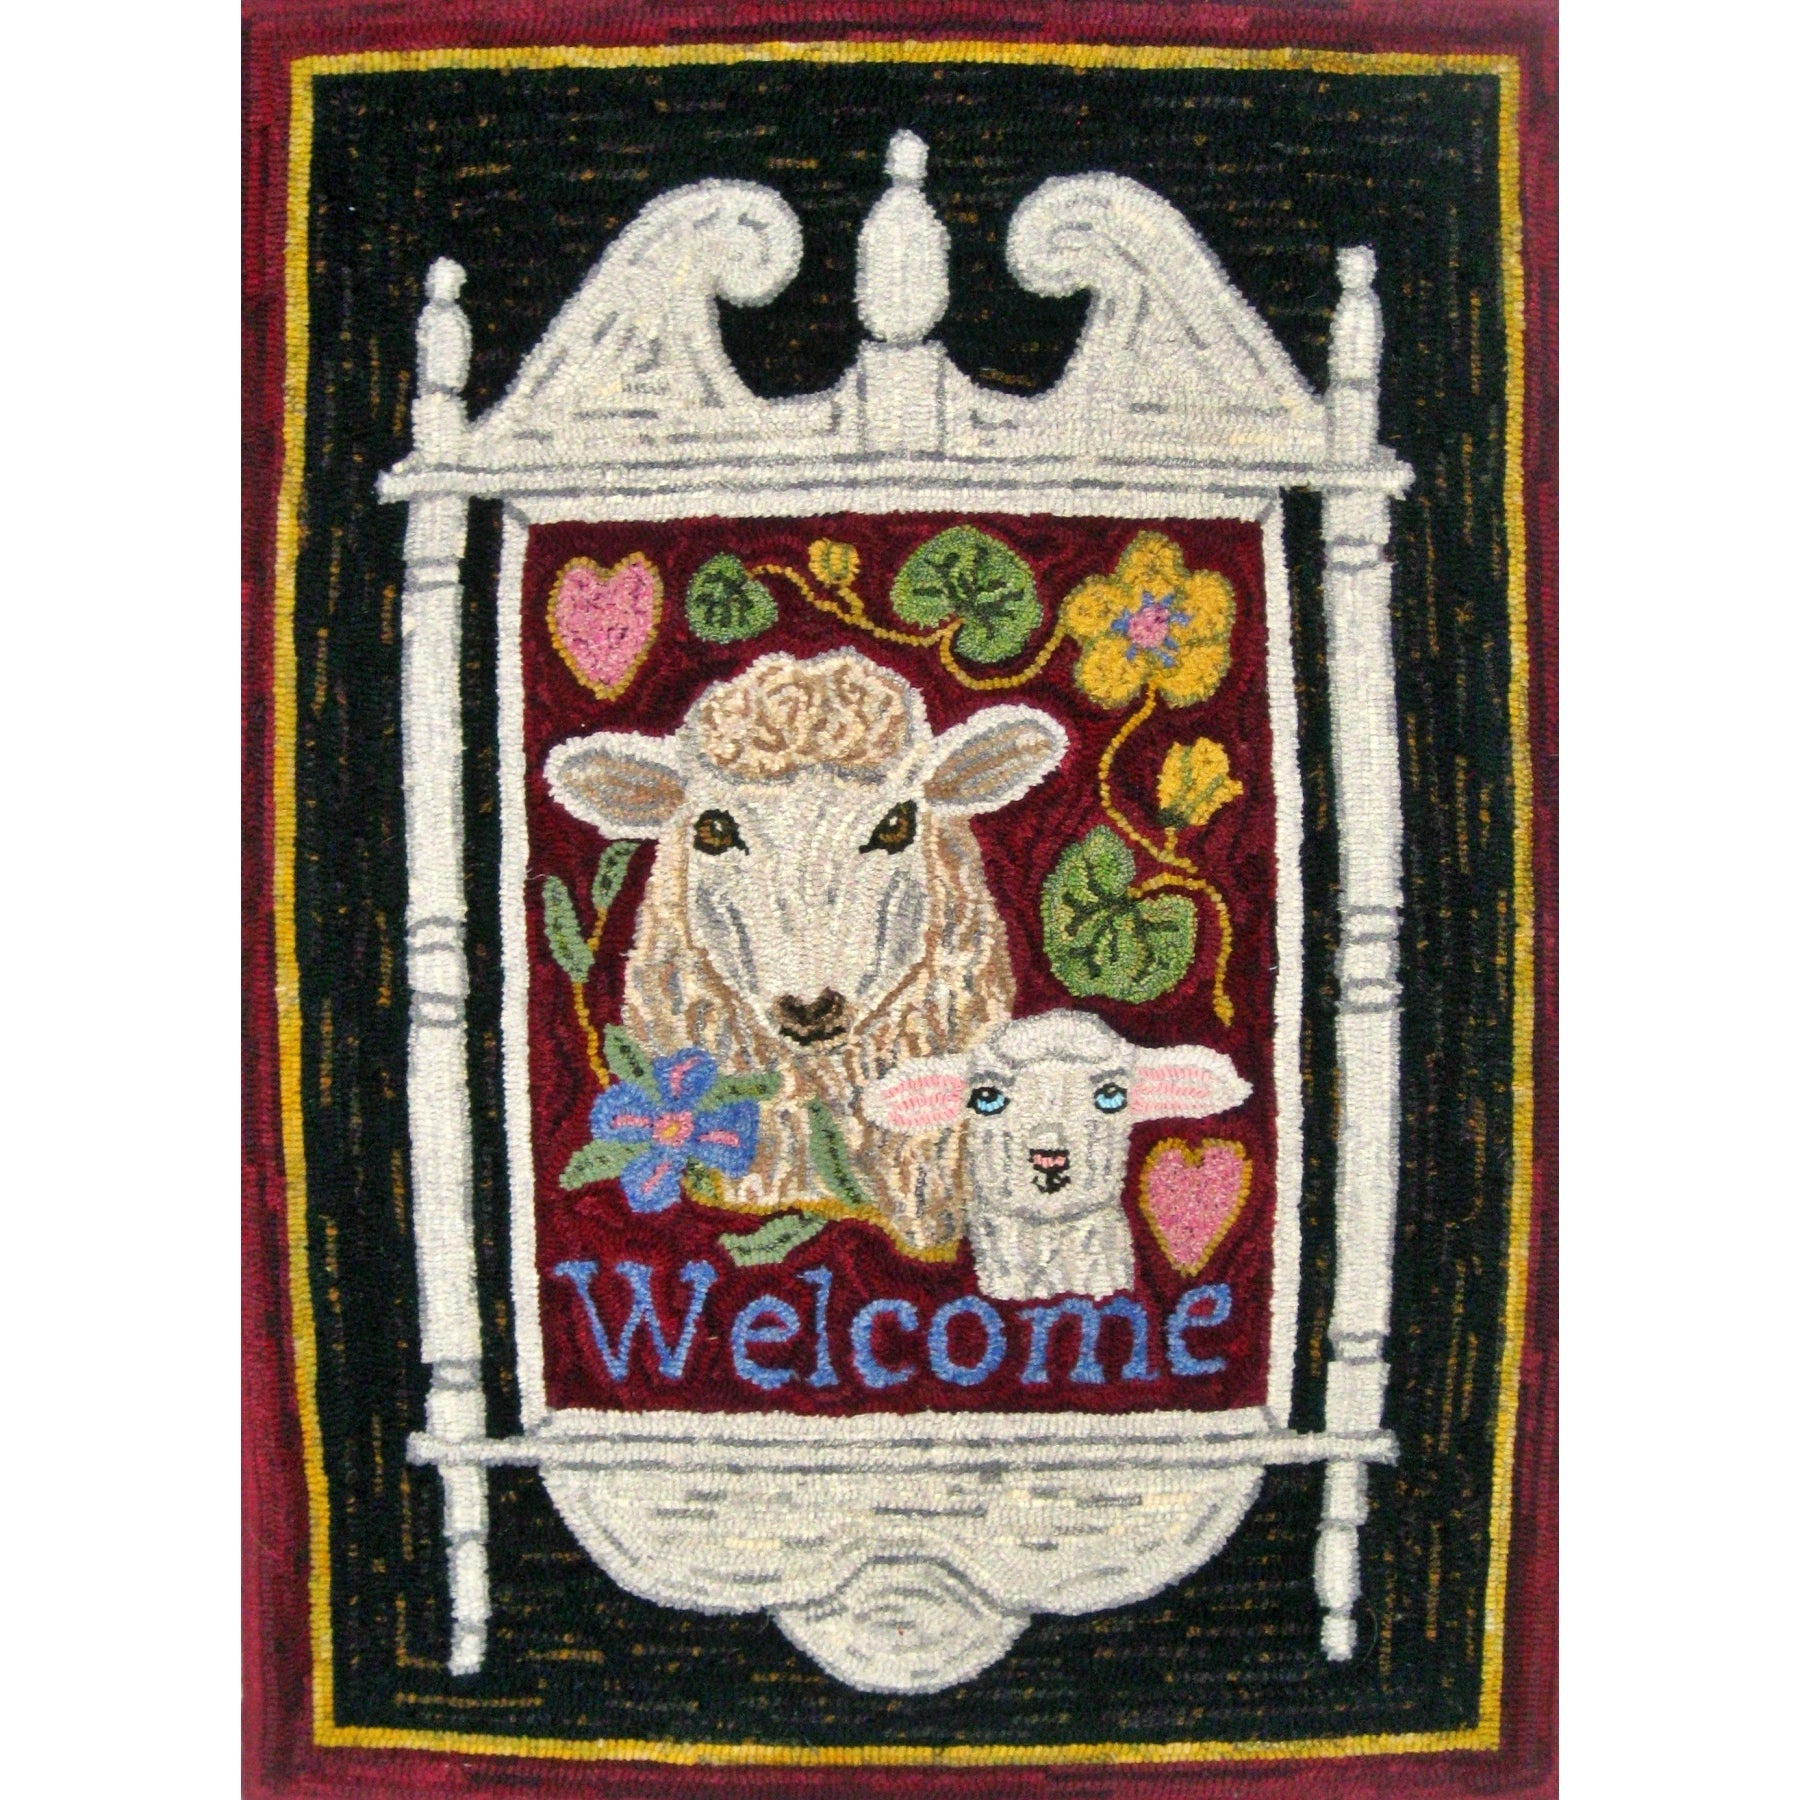 A Wooly Welcome, rug hooked by John Leonard